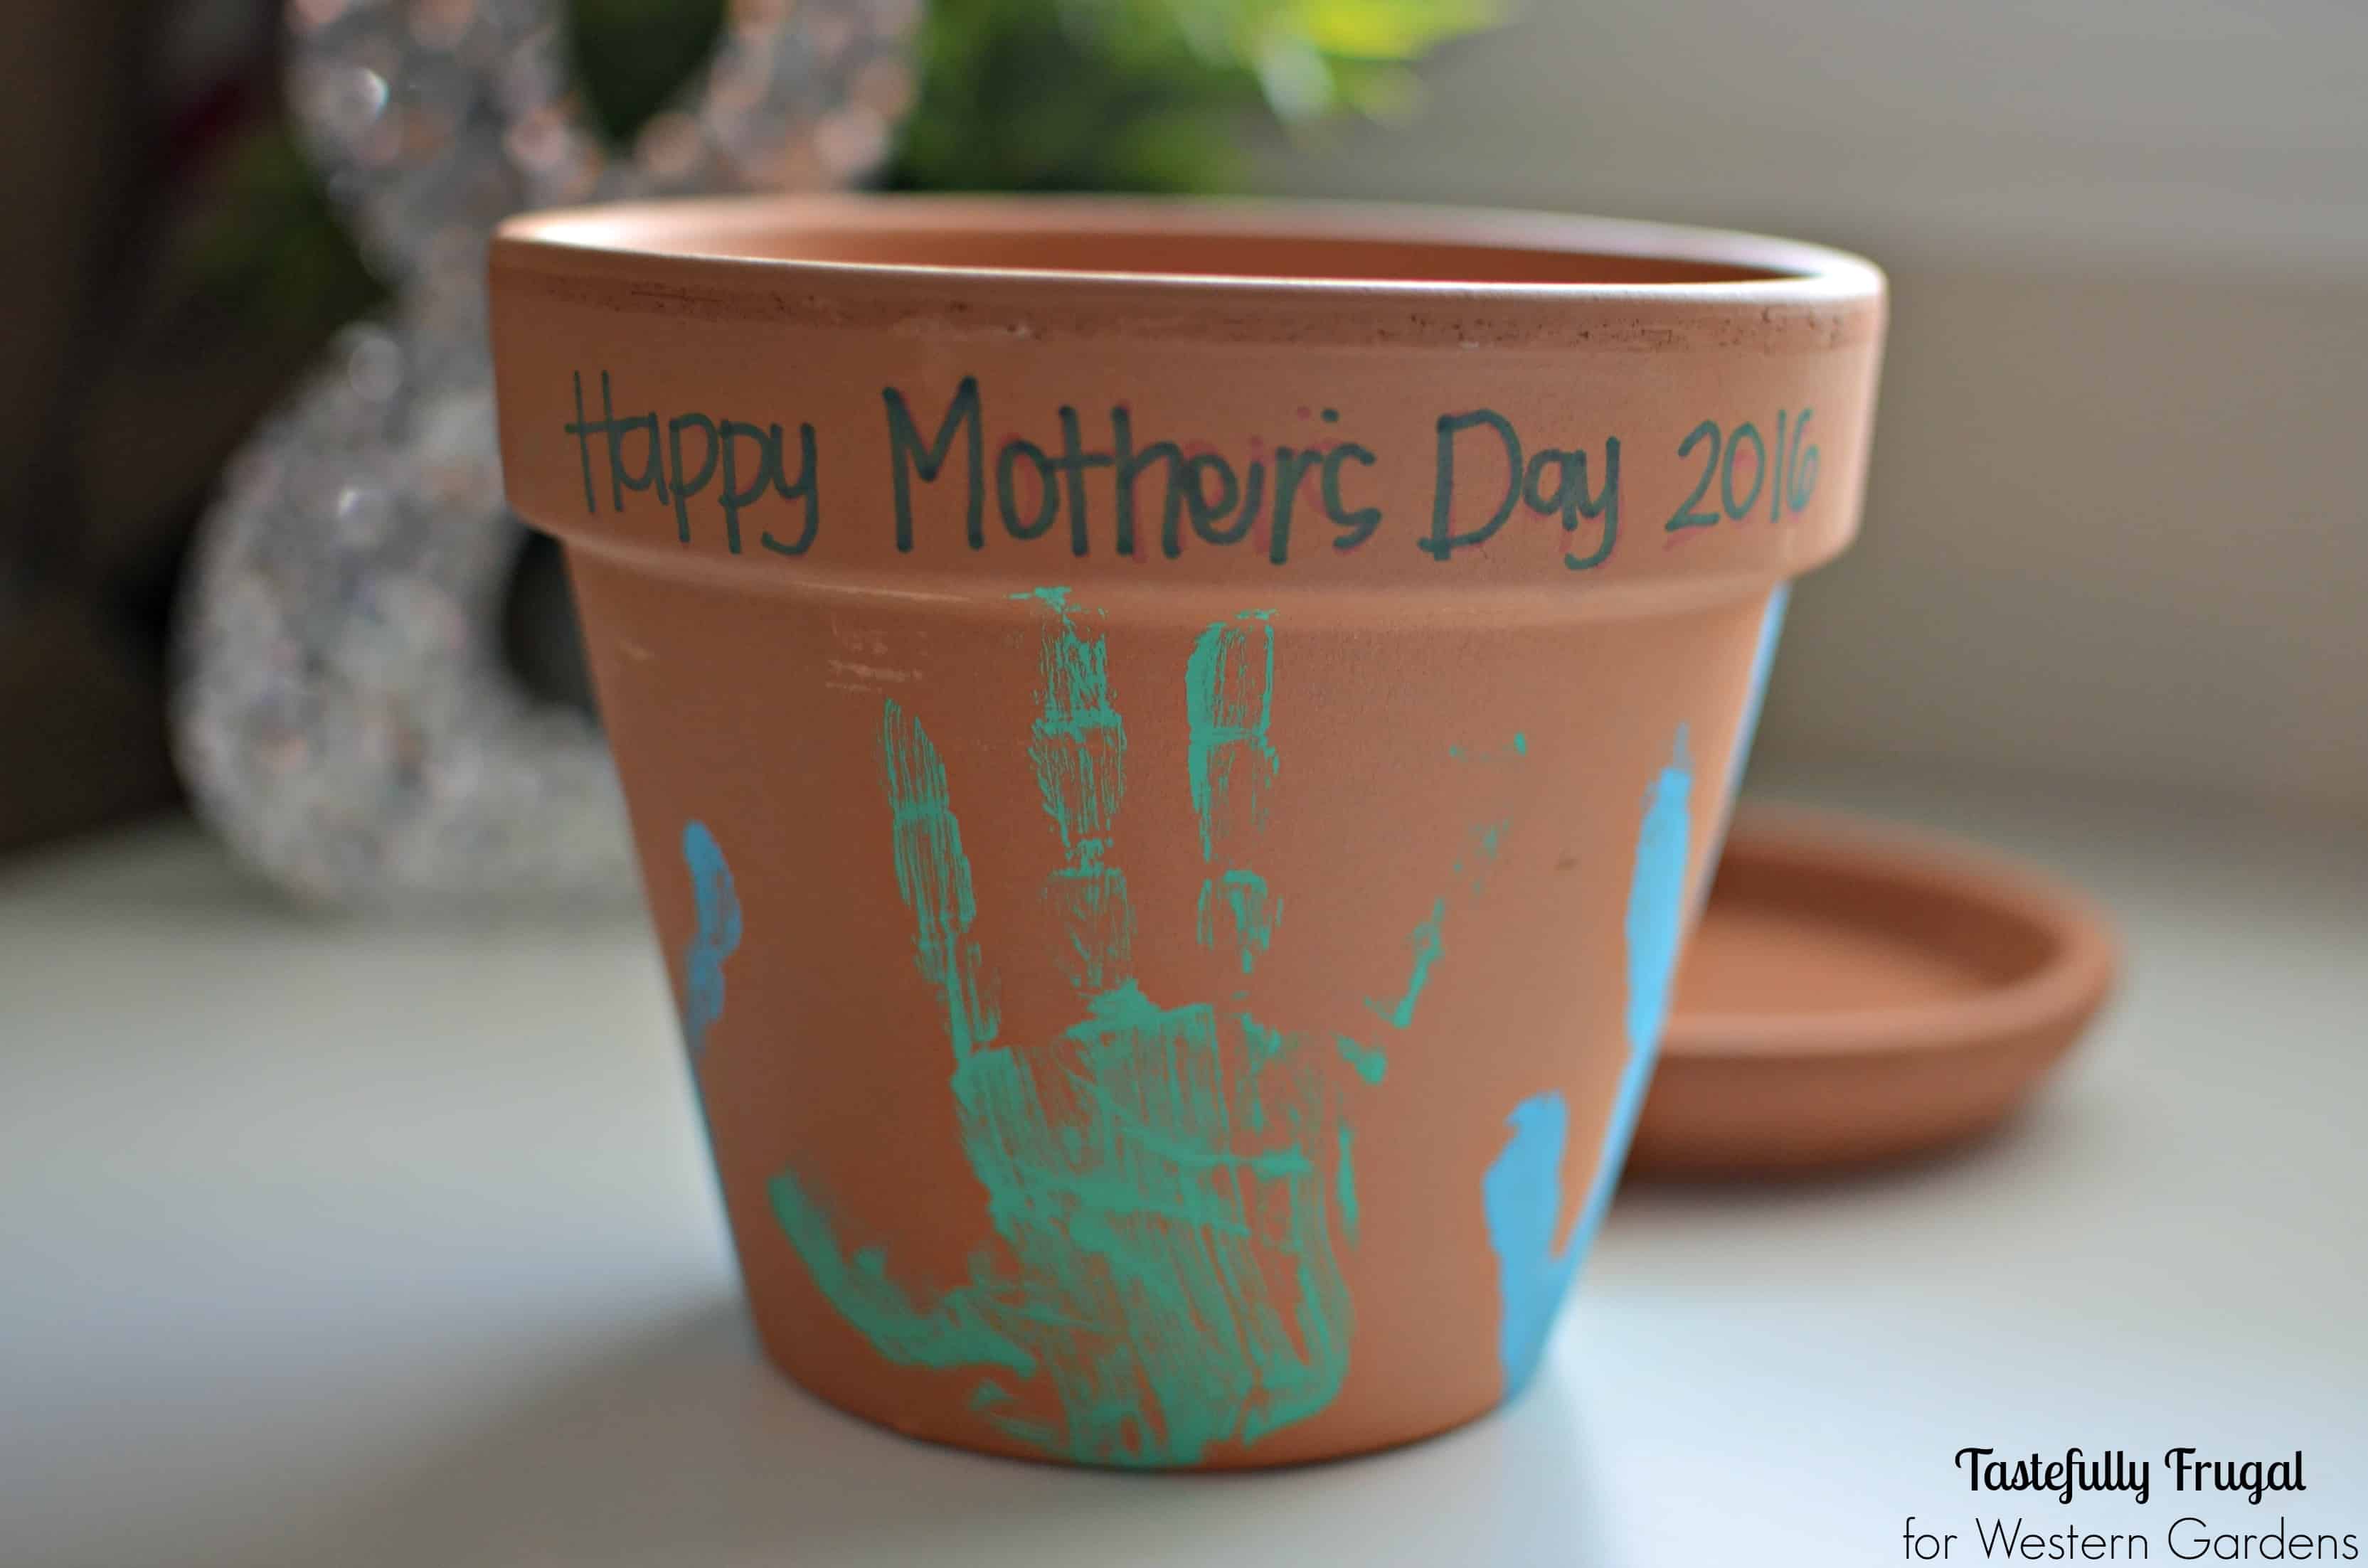 potted flowers for mother's day